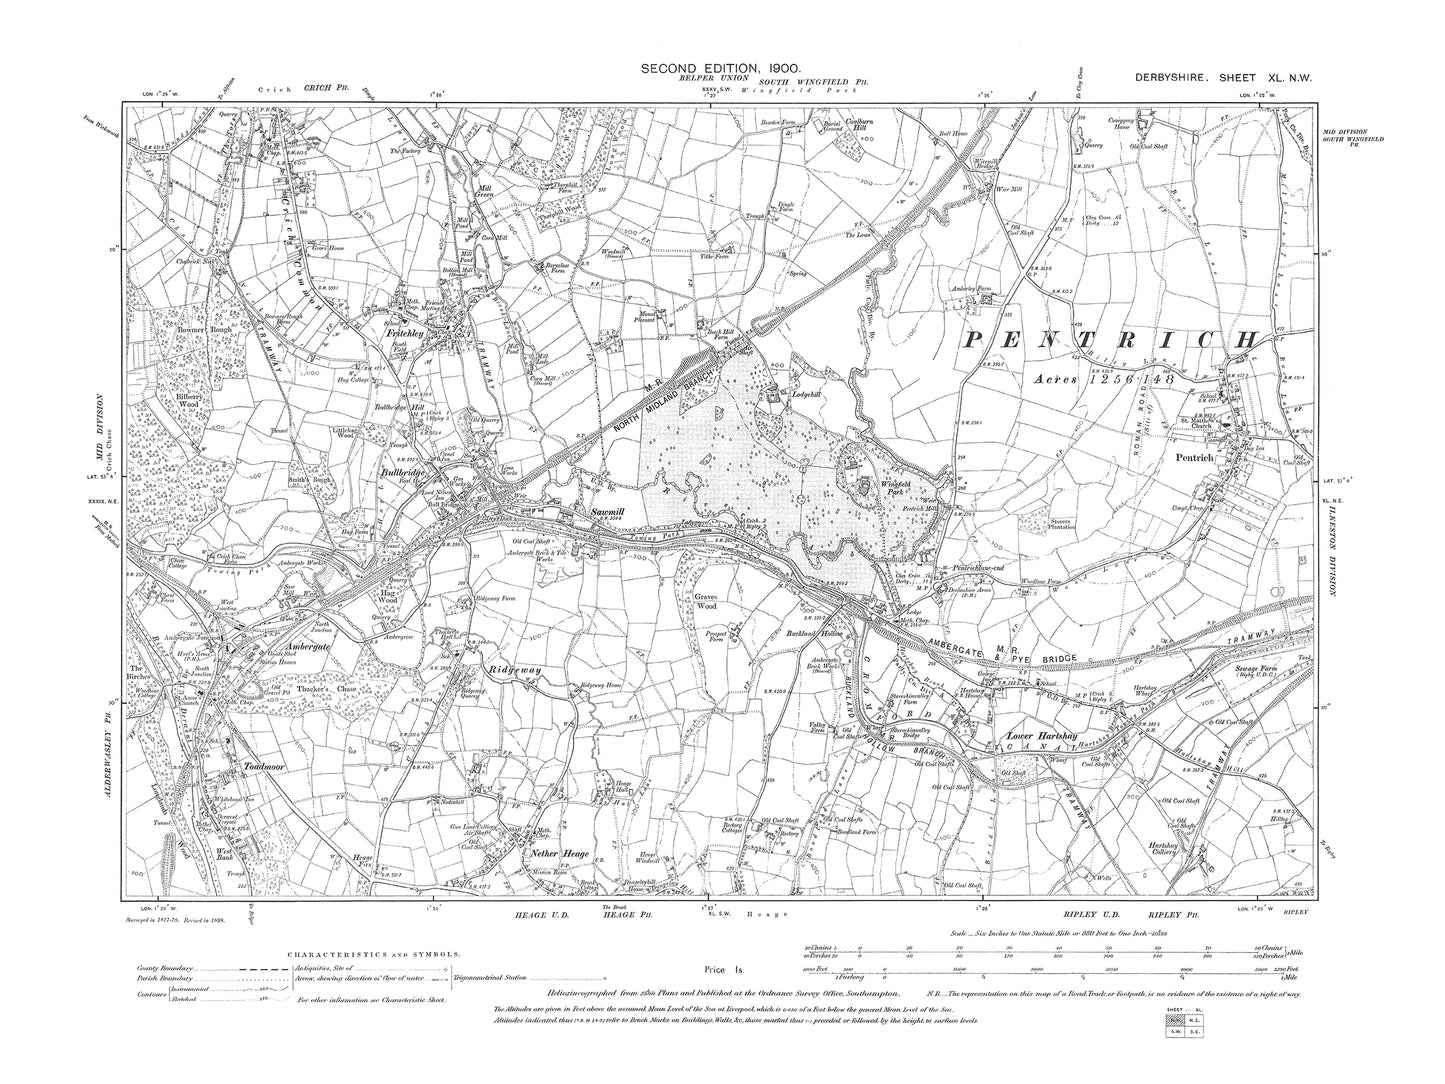 Old OS map dated 1900, showing Fritchley, Bullbridge, Toadmoor in Derbyshire 40NW